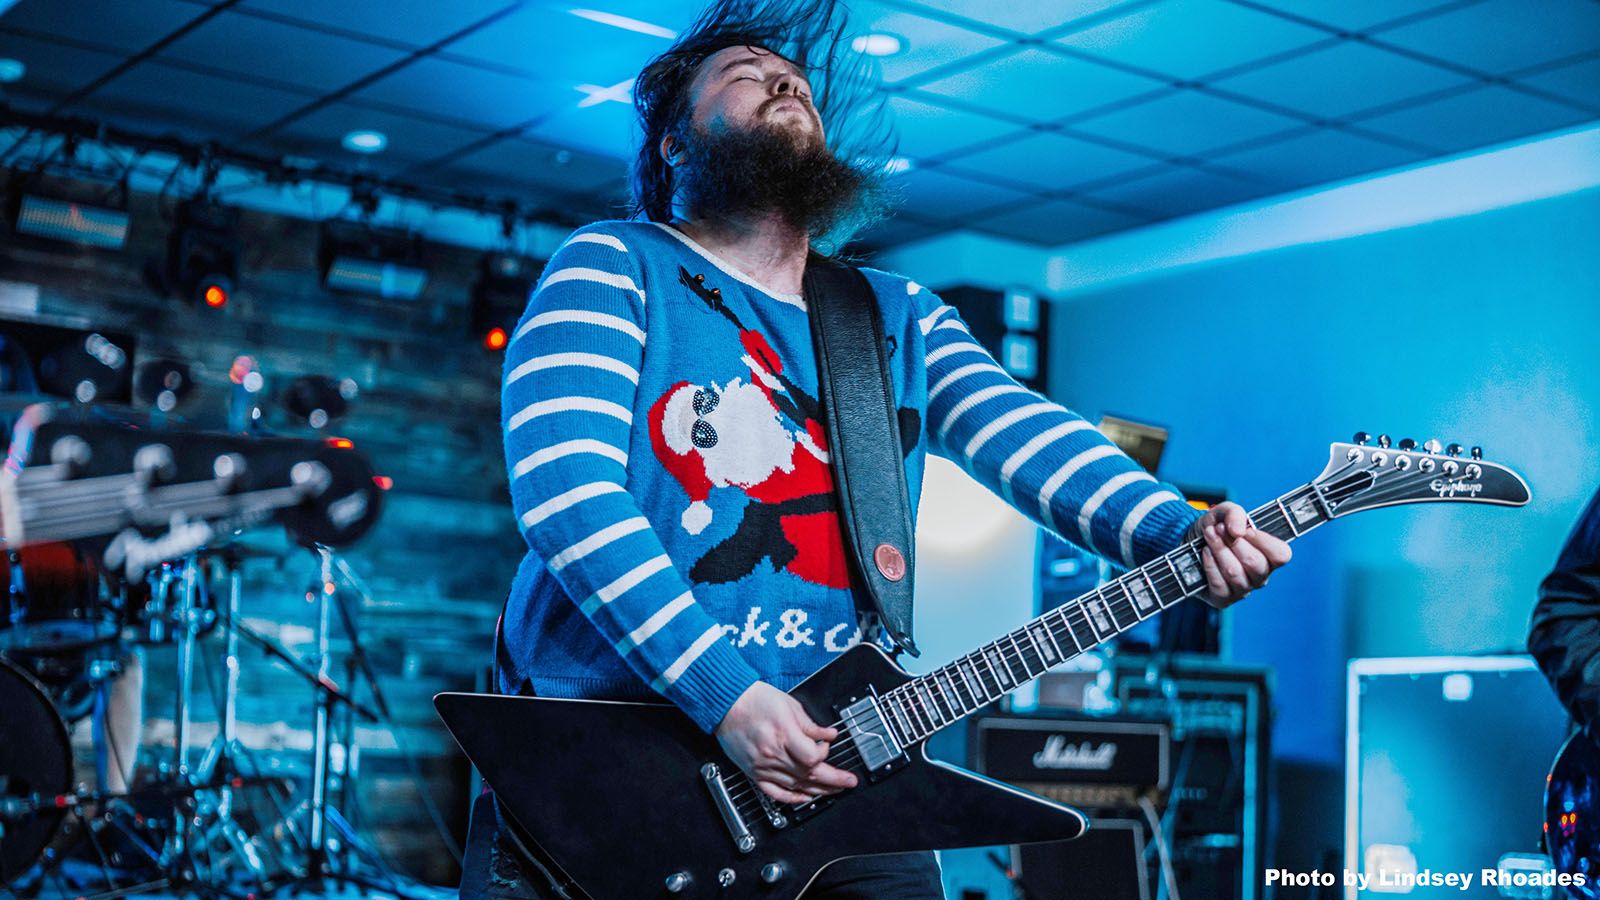 You can count on Austin Wiard breaking out some festive attire when To Breathe Again perform at their To Christmas Again show on Friday, Dec. 22, at Piere’s.